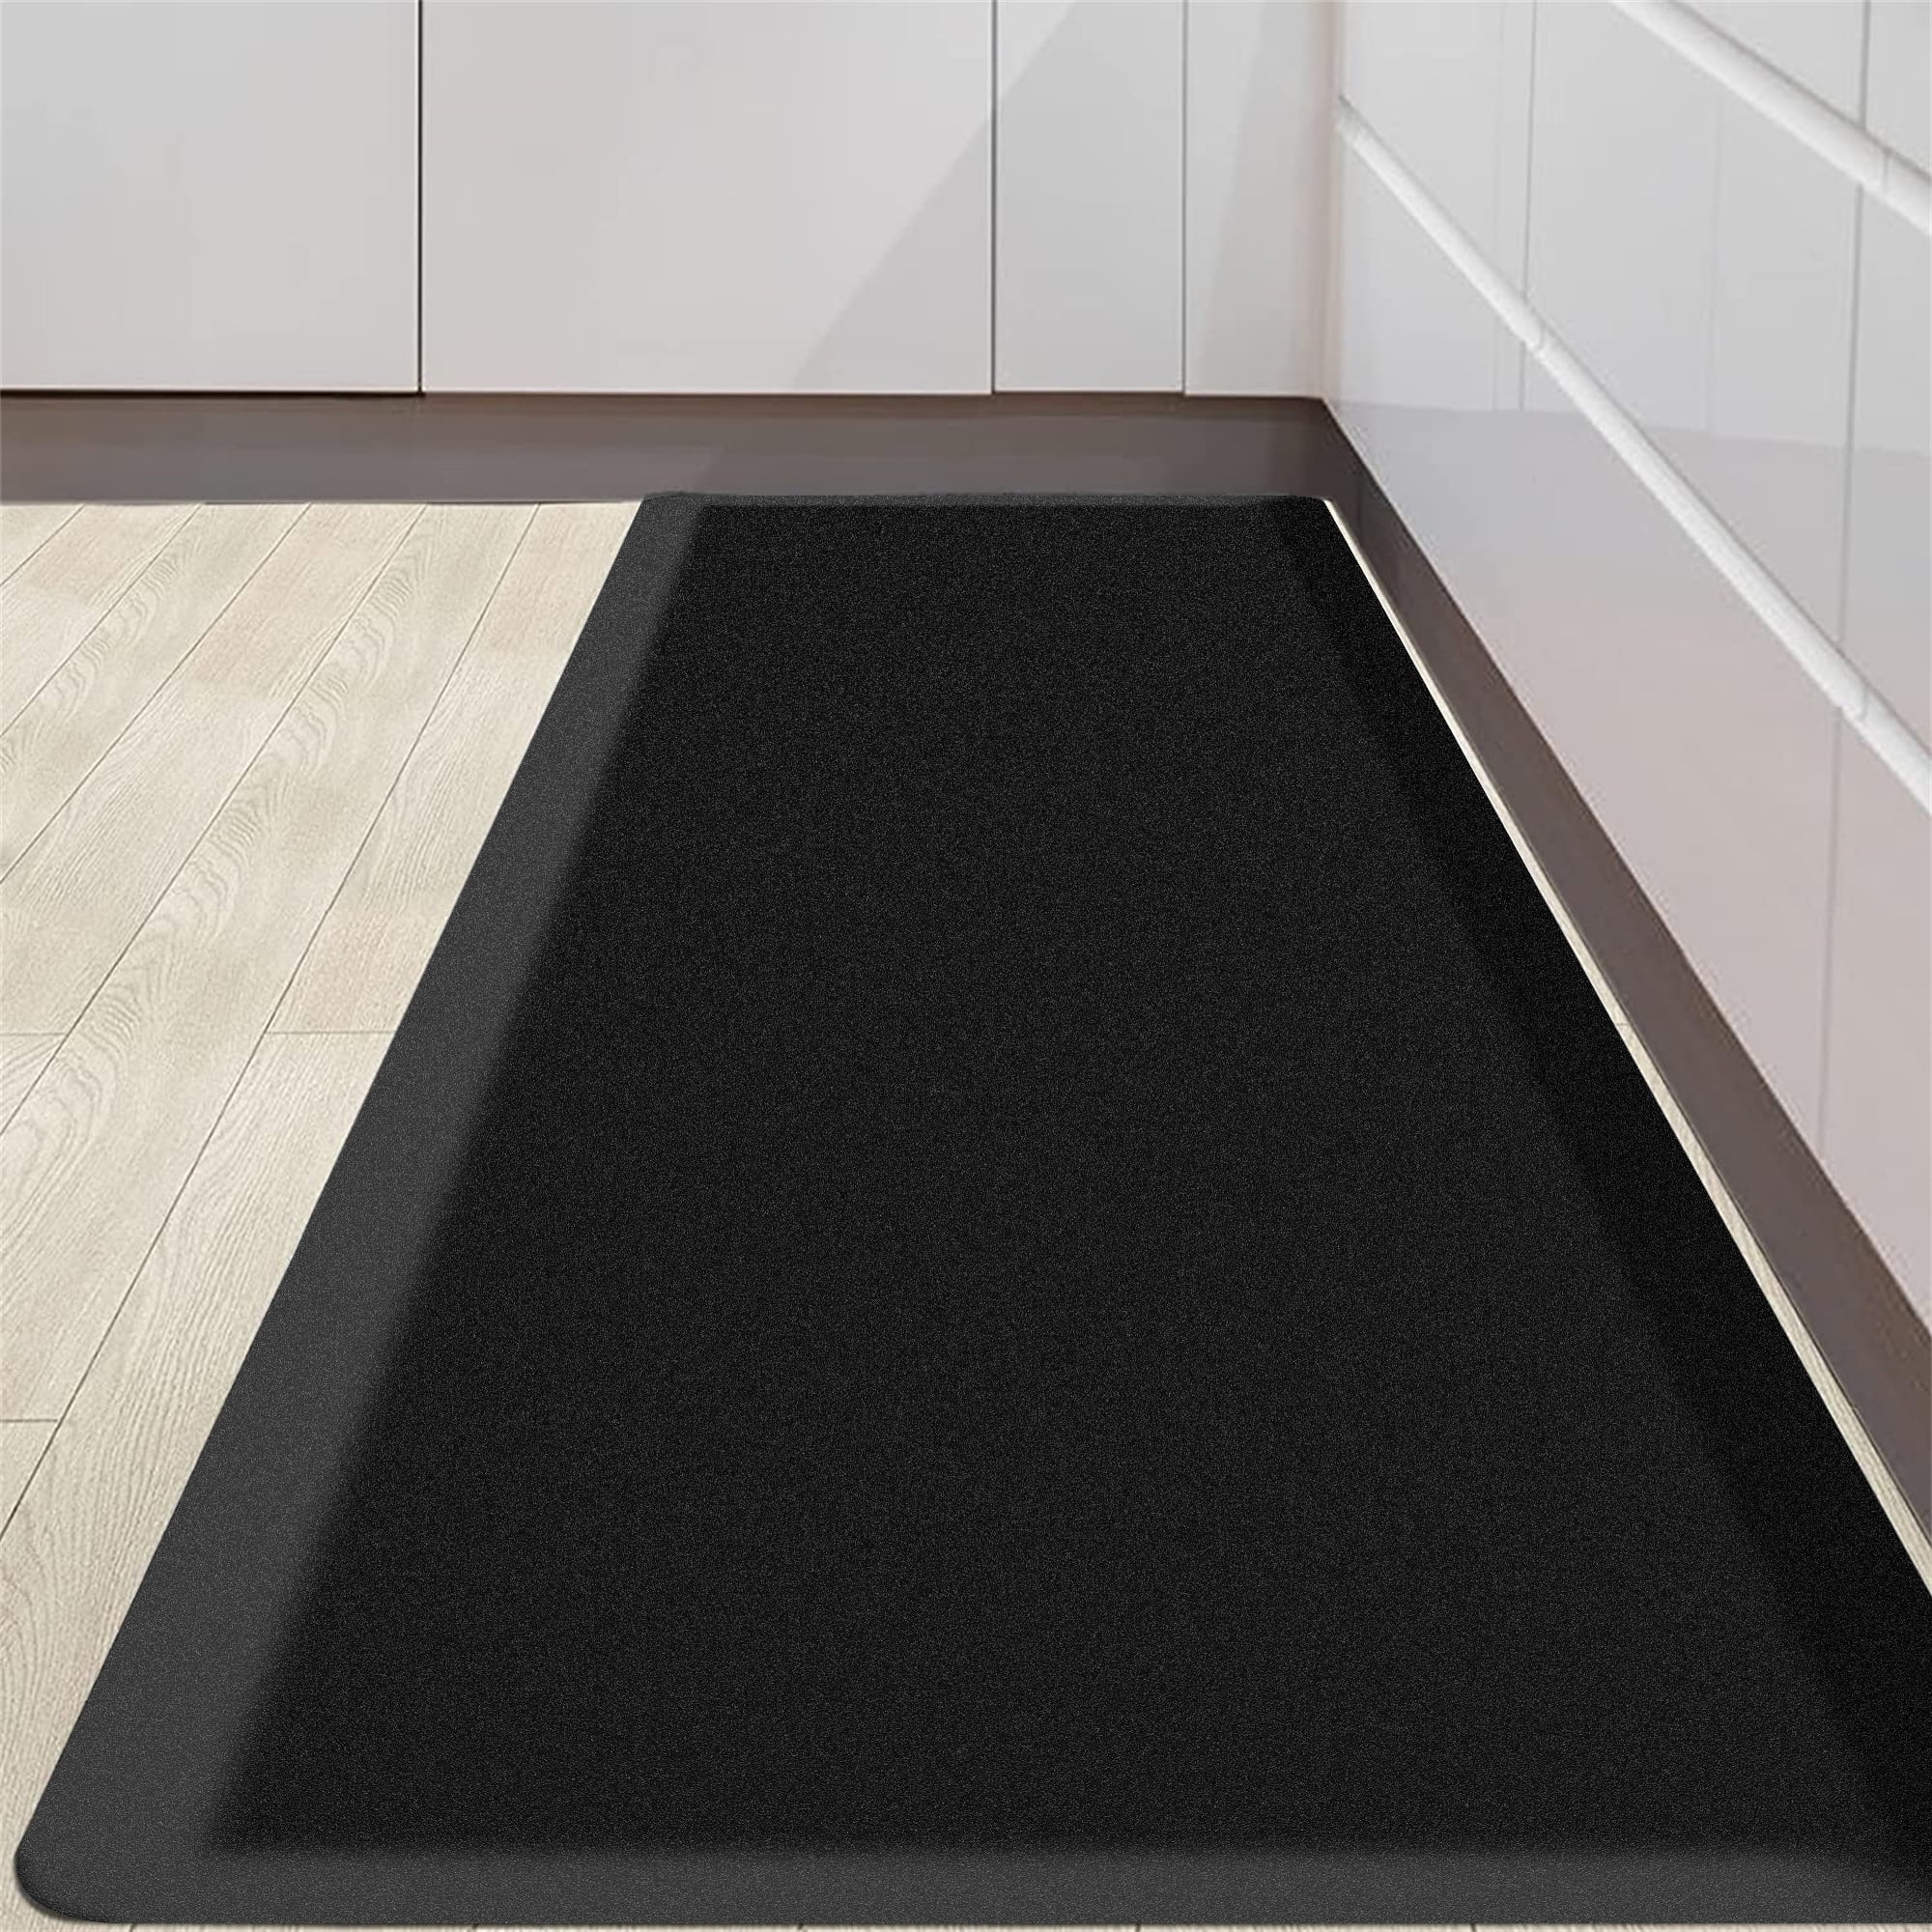 Art3d Black 17 in. x 28 in. Anti-Fatigue Kitchen Mat Non-Slip Foam Comfort  Mats for Standing Desk Office or Laundry Floor Y12hd001BK - The Home Depot